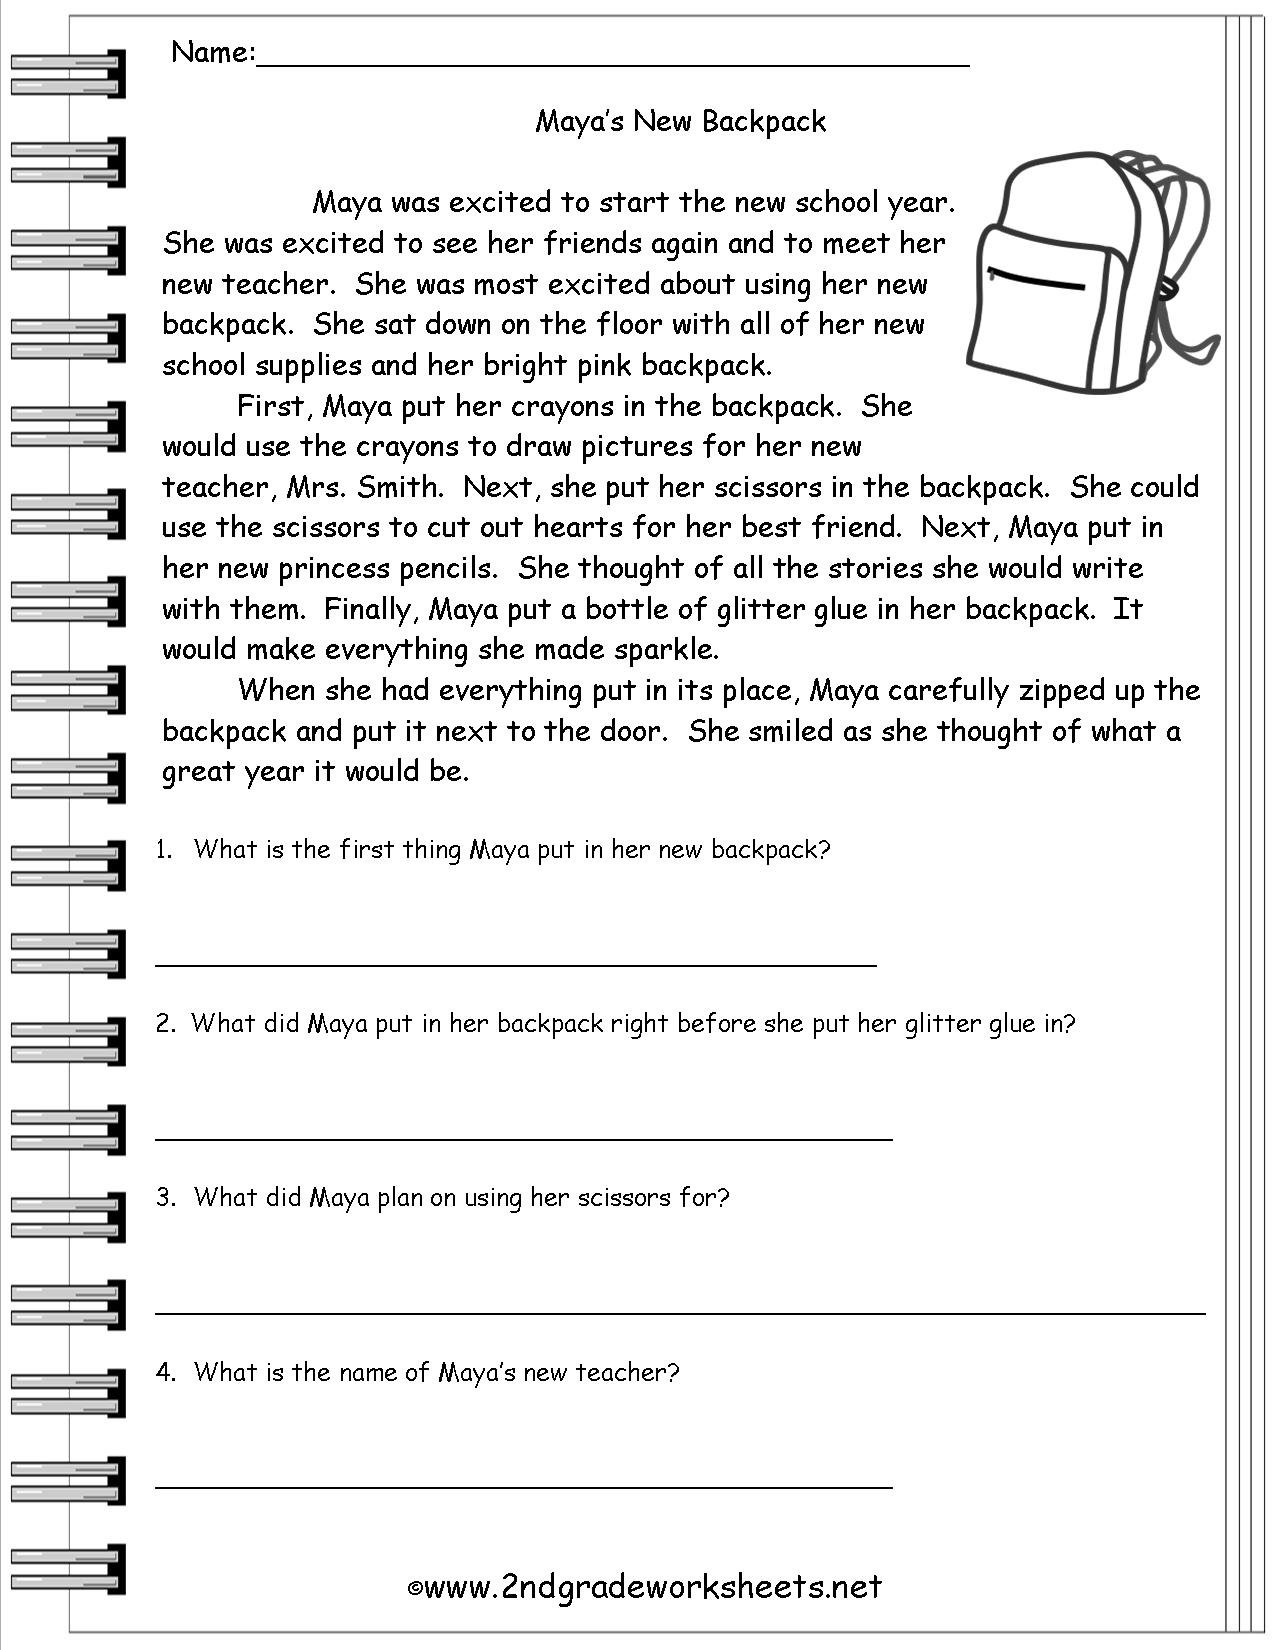 10 Spectacular Main Idea Worksheets For 5Th Grade reading worksheeets 8 2023